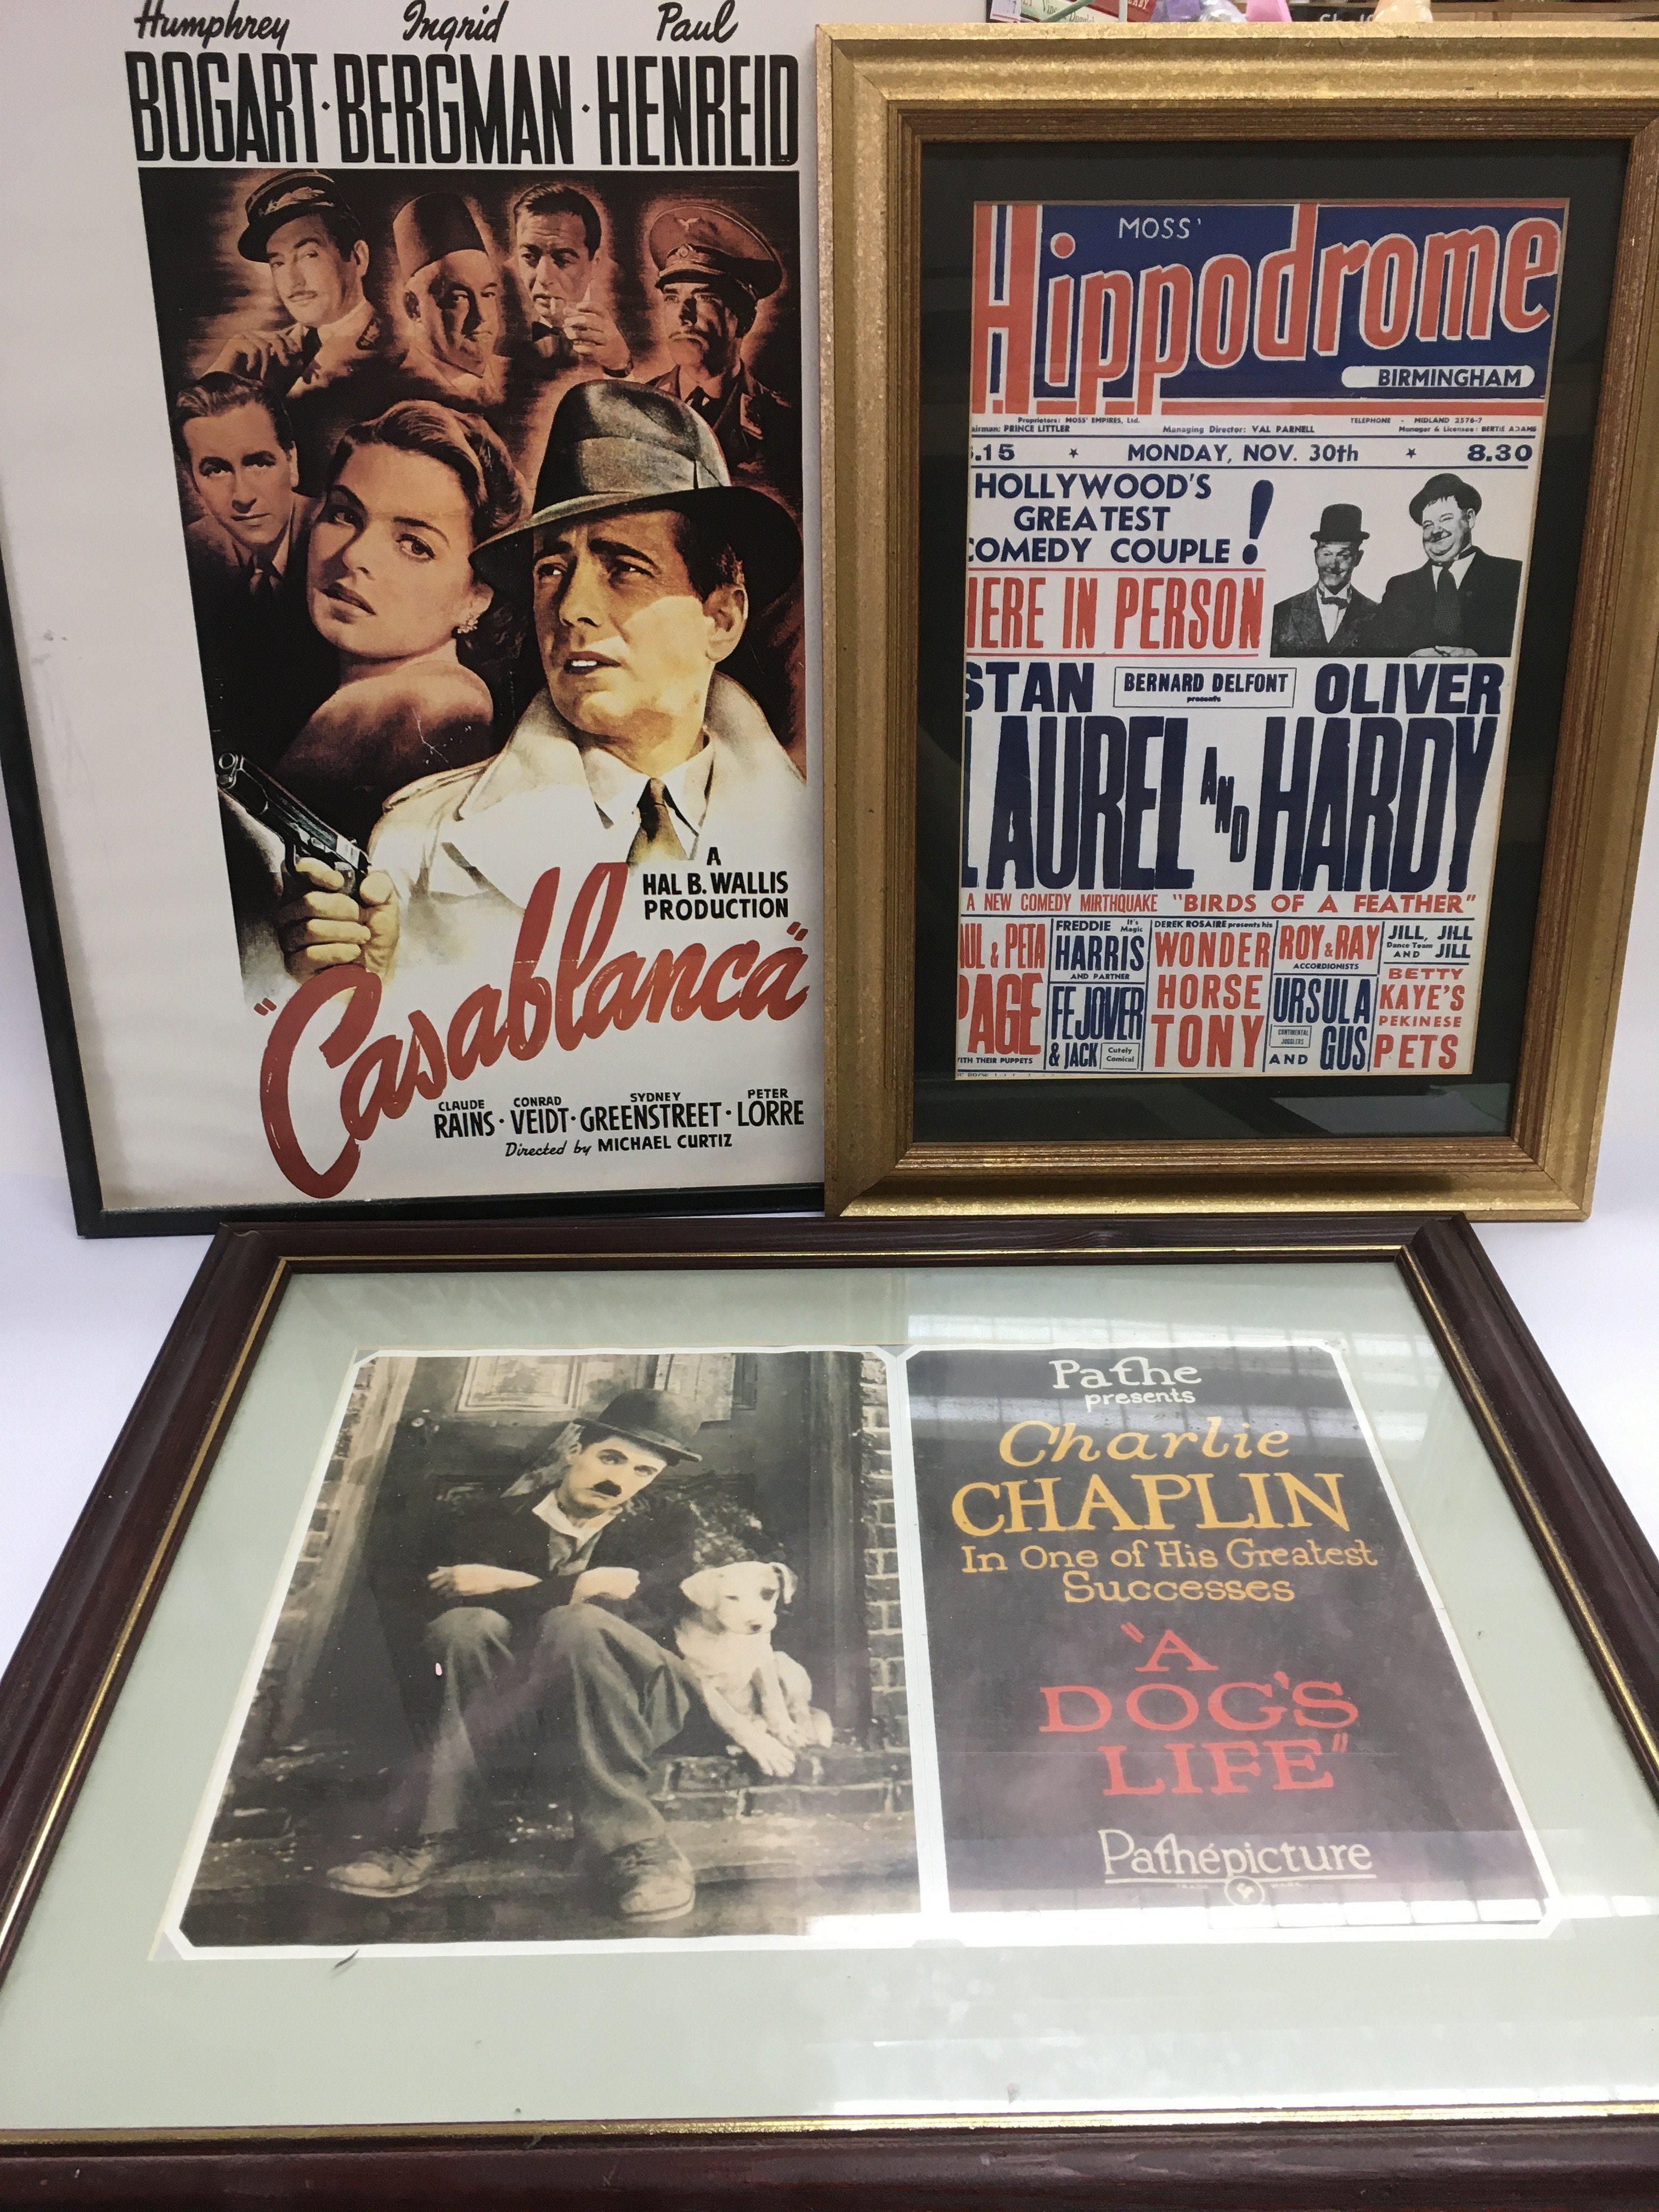 A collection of reprinted vintage movie posters.